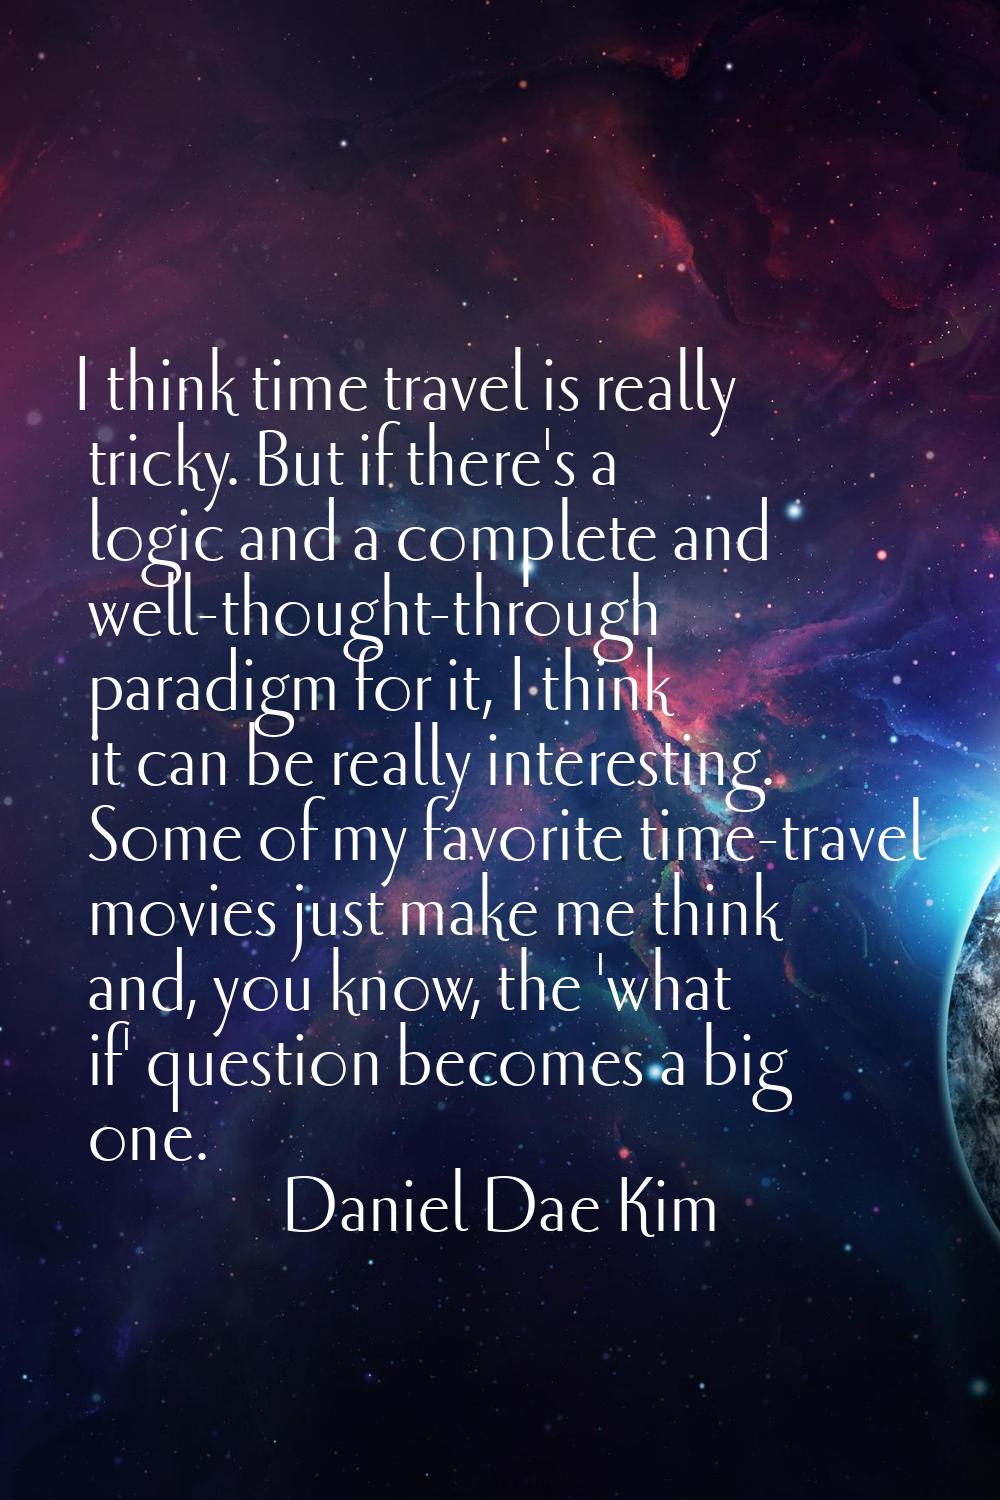 I think time travel is really tricky. But if there's a logic and a complete and well-thought-throug